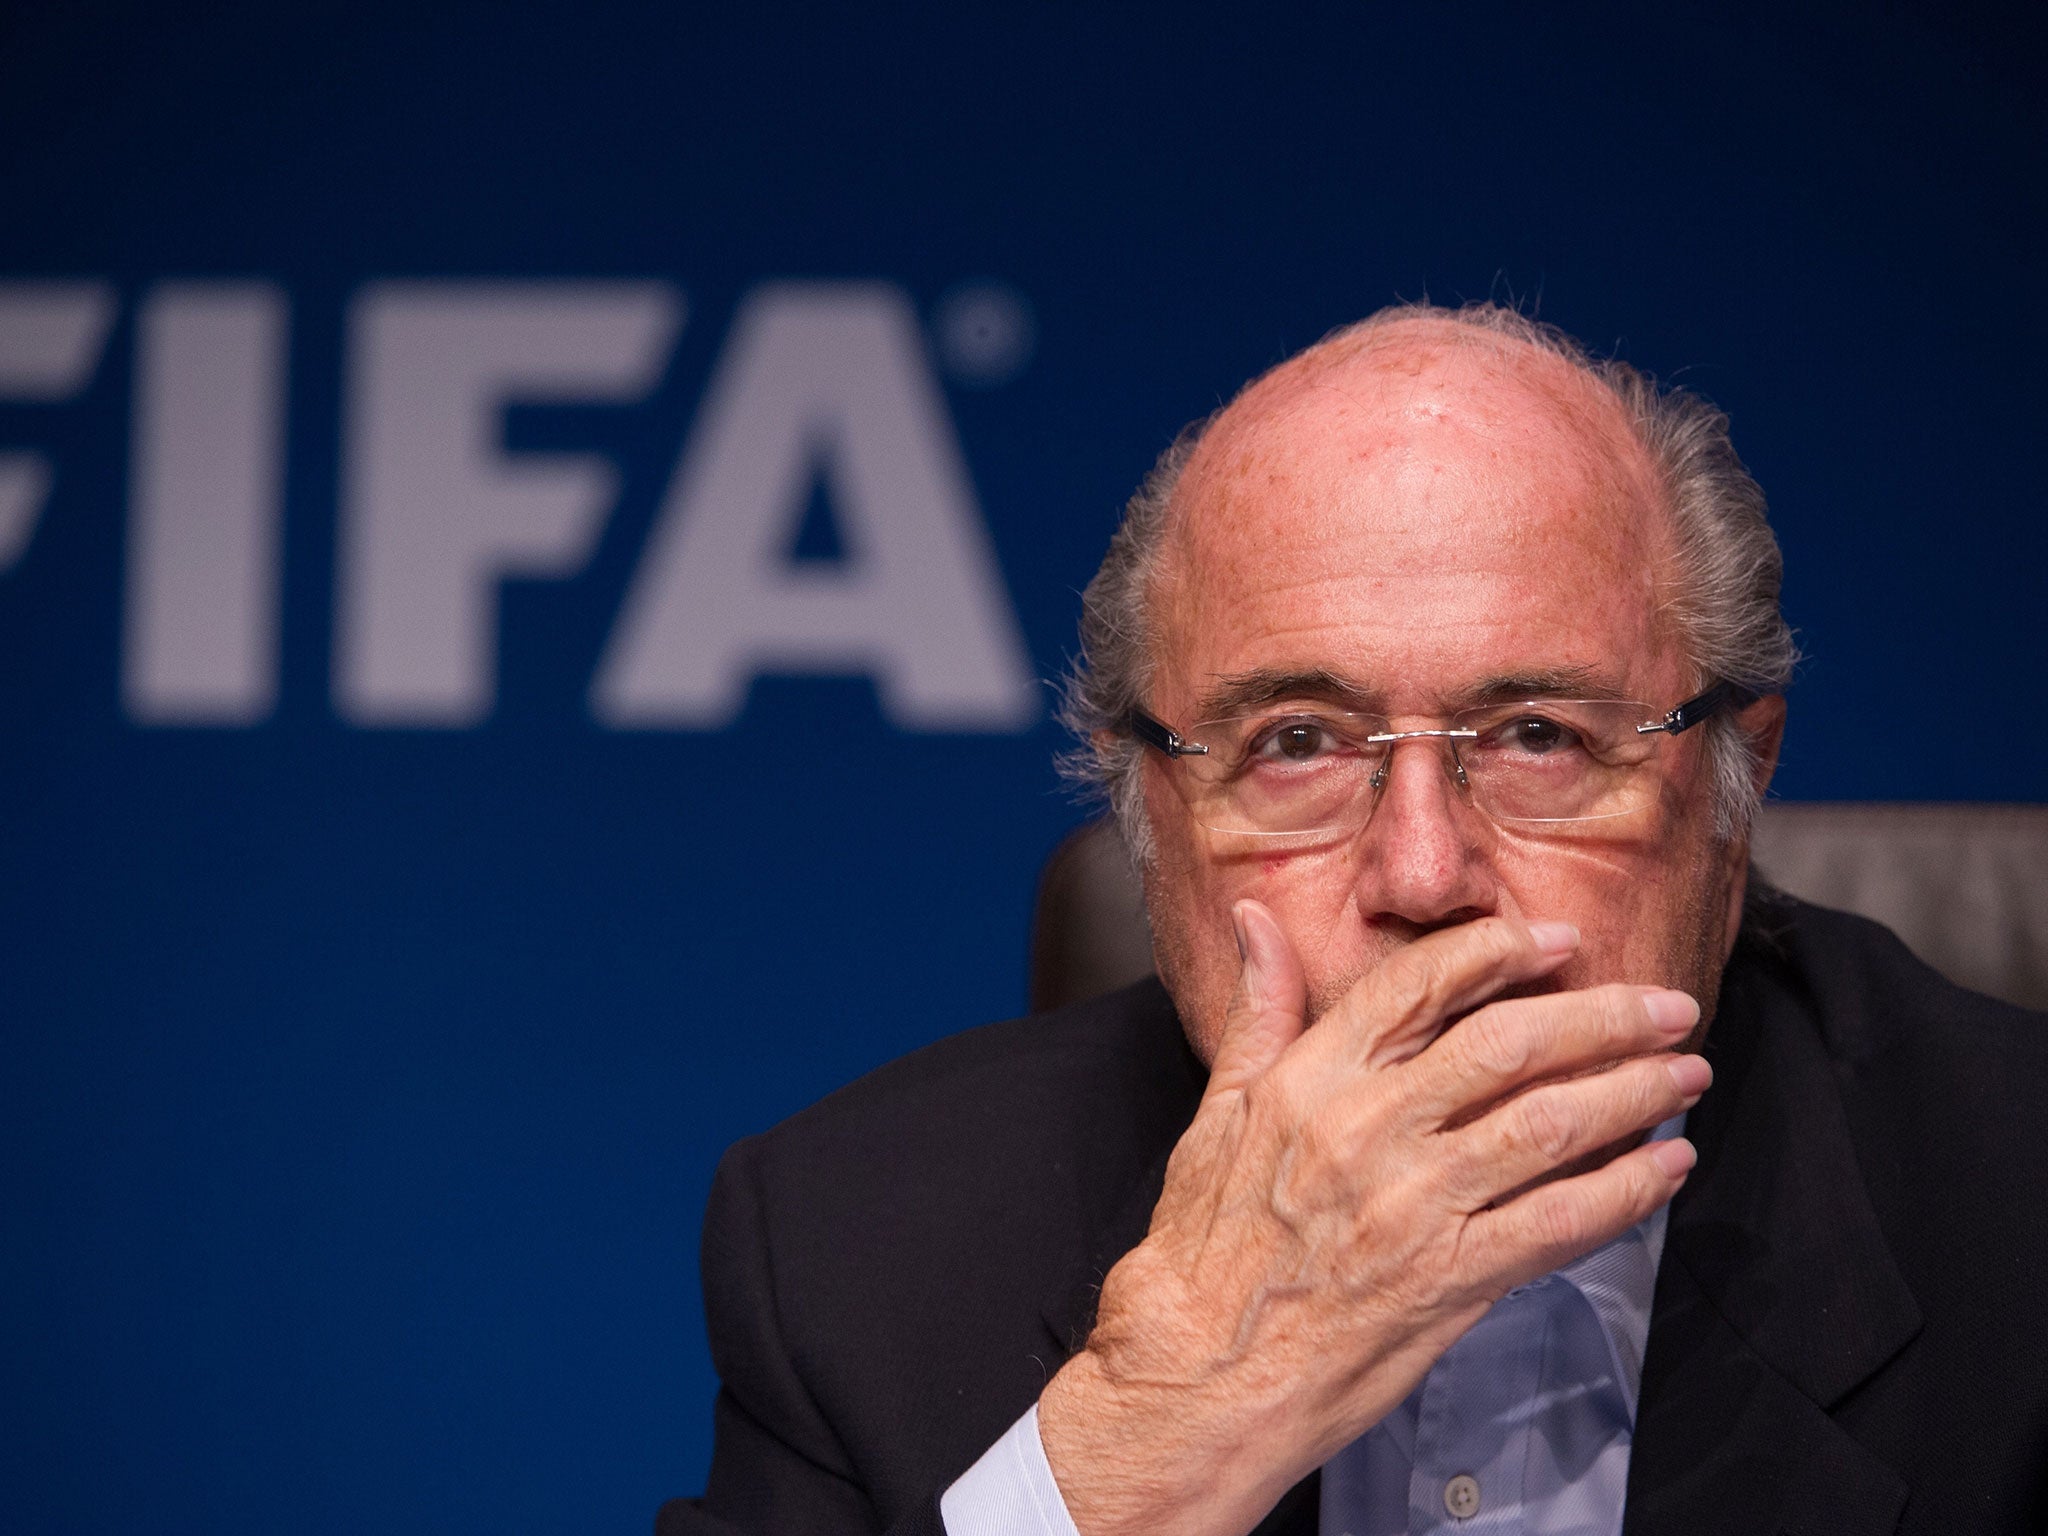 Fifa president Sepp Blatter at the launch of the 2018 World Cup logo